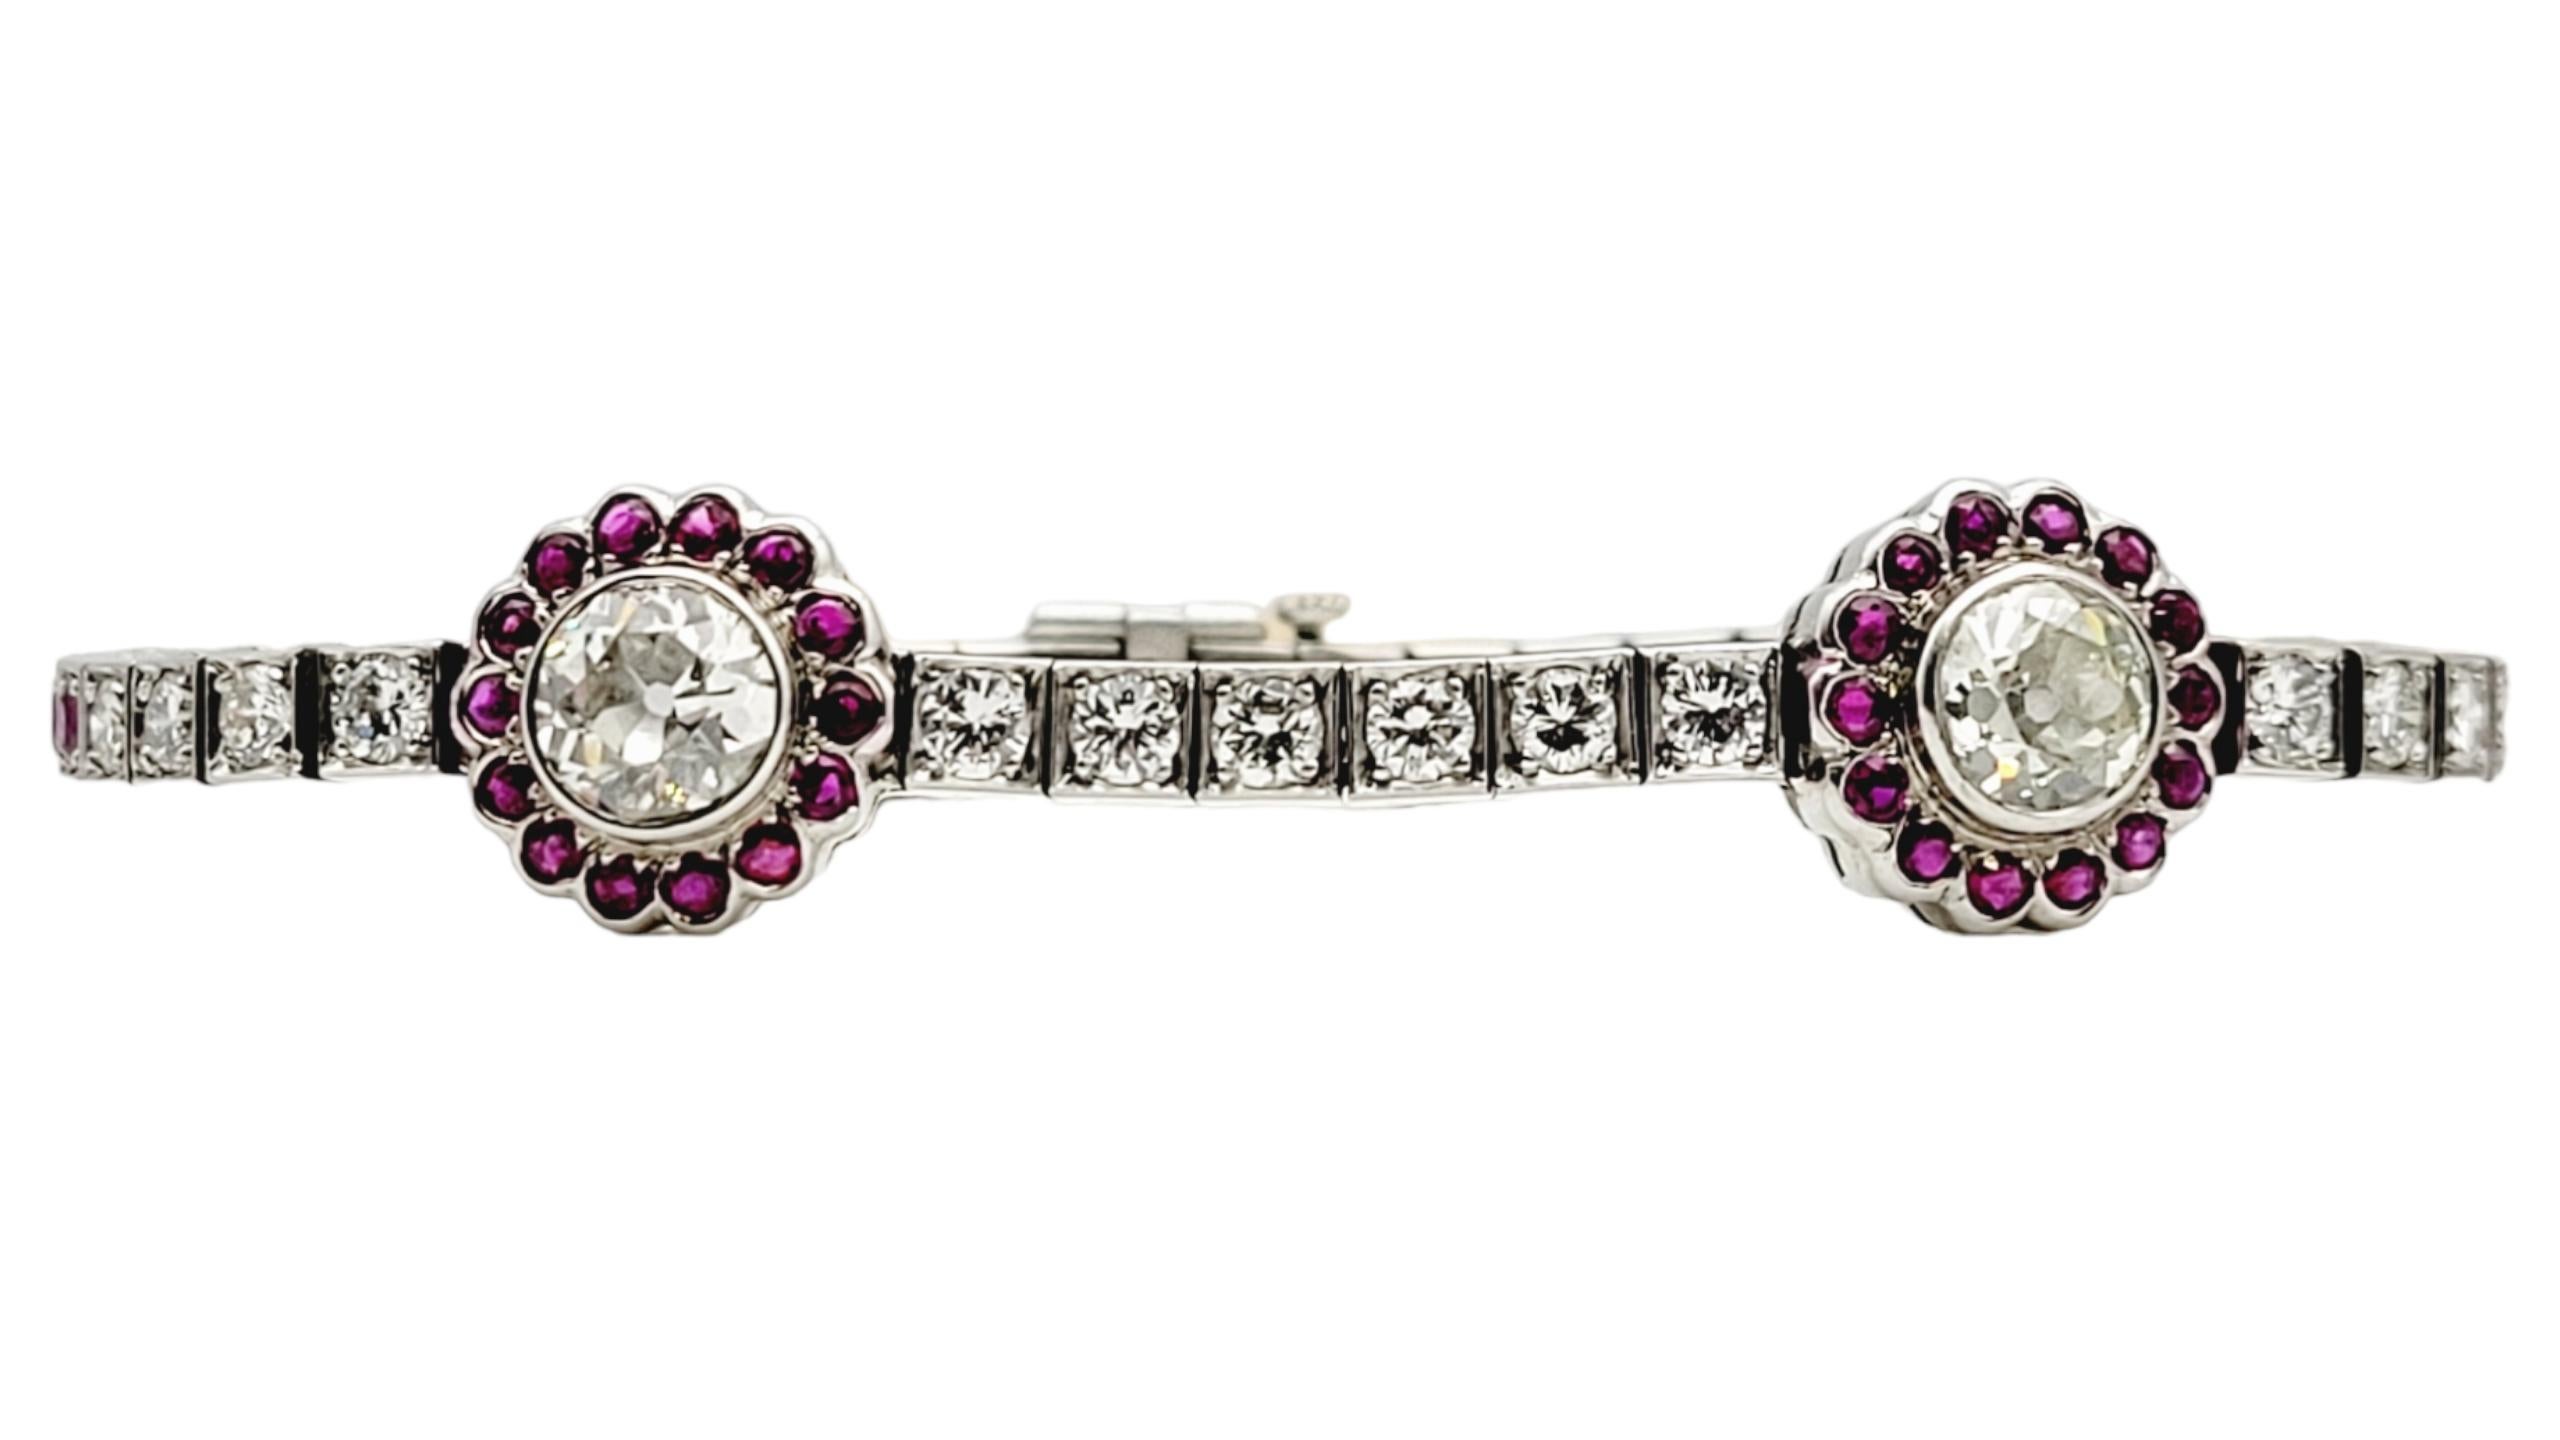 Stunning vintage Old European cut natural diamond and natural ruby station bracelet. This piece really pops with color and sparkle in person!

This incredible bracelet features 2 sparkling bezel set round Old European cut diamonds (K / SI2) accented